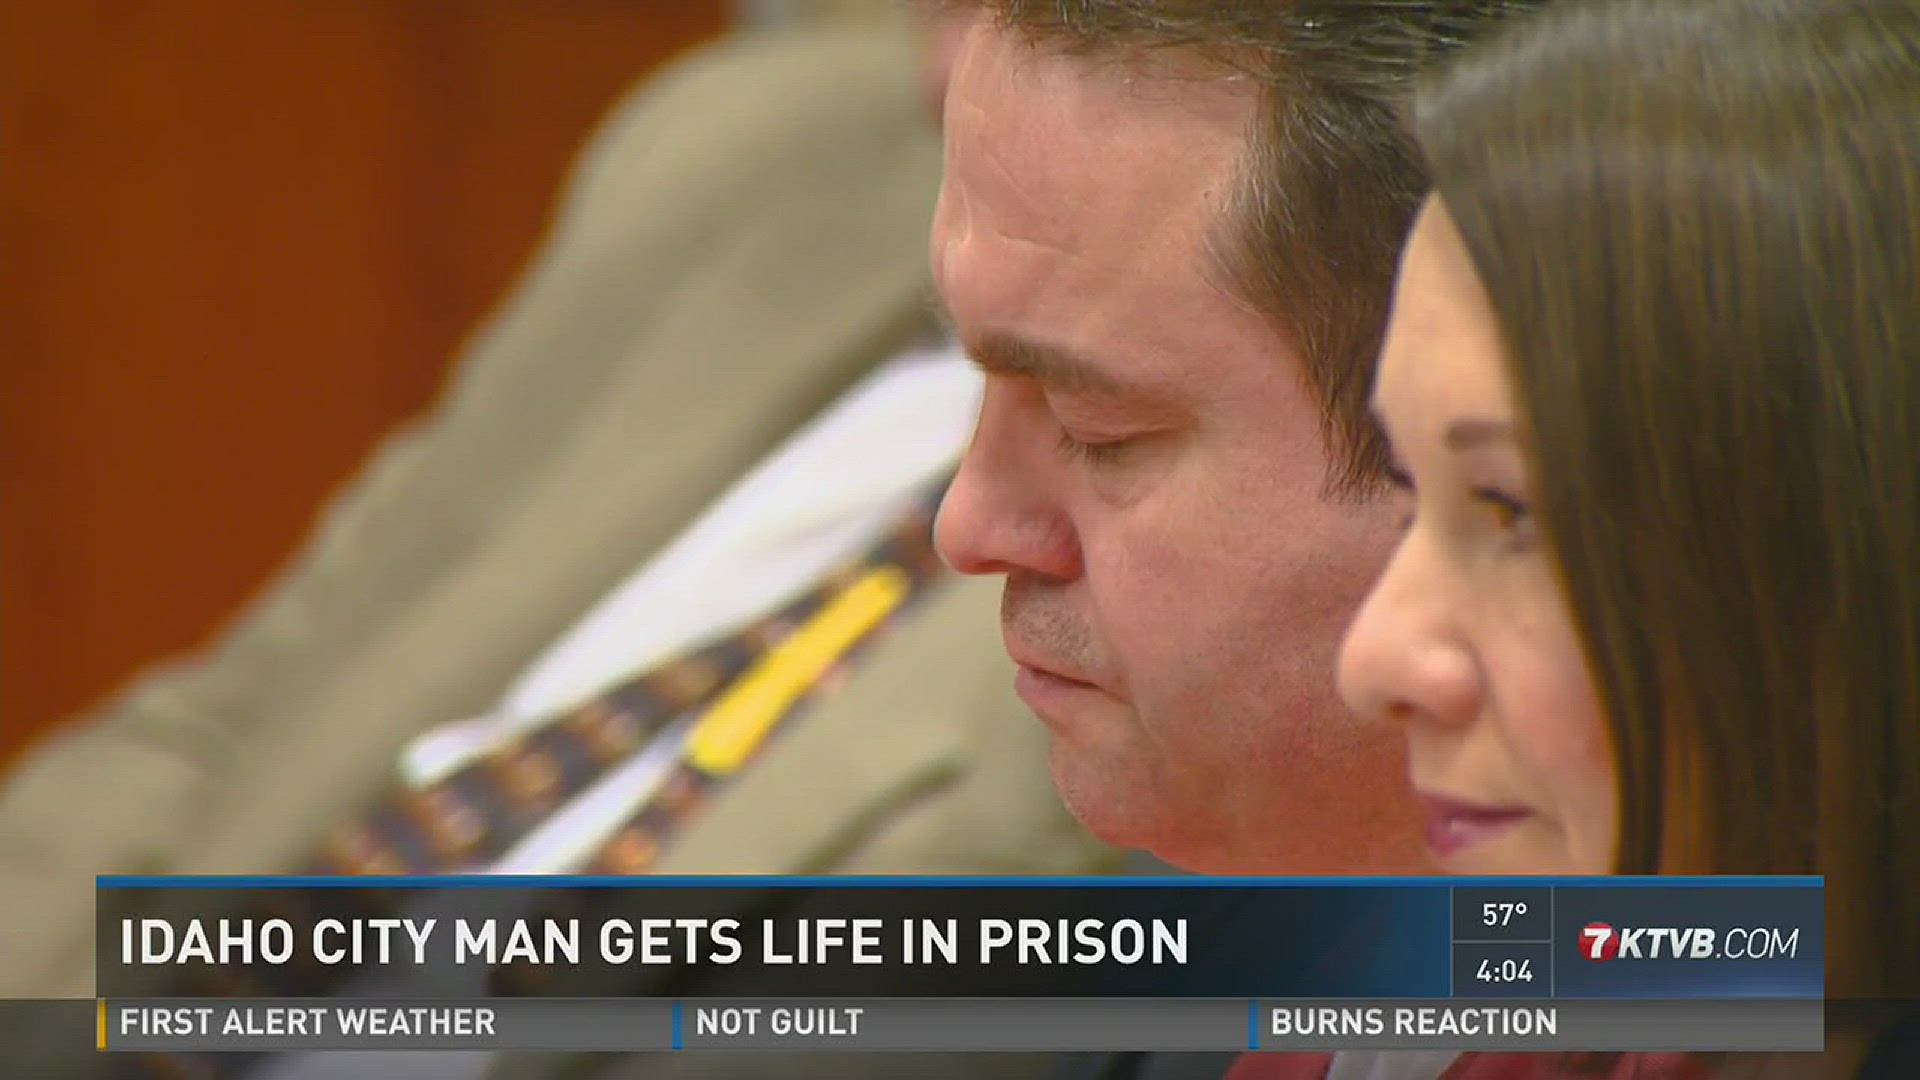 Michael Dauber got life in prison for killing two men and dismembering their bodies.